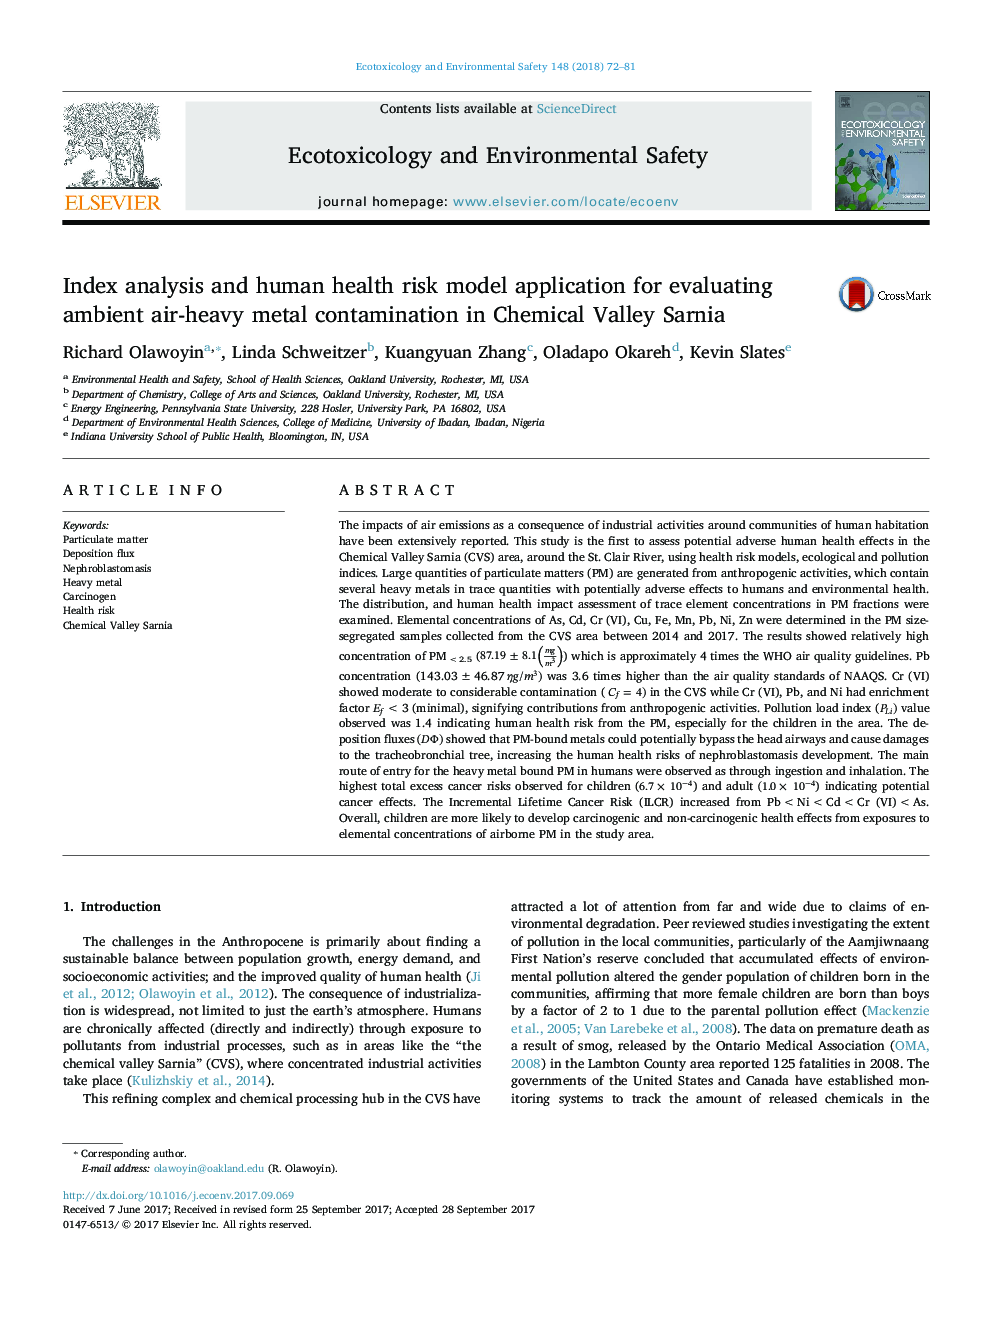 Index analysis and human health risk model application for evaluating ambient air-heavy metal contamination in Chemical Valley Sarnia